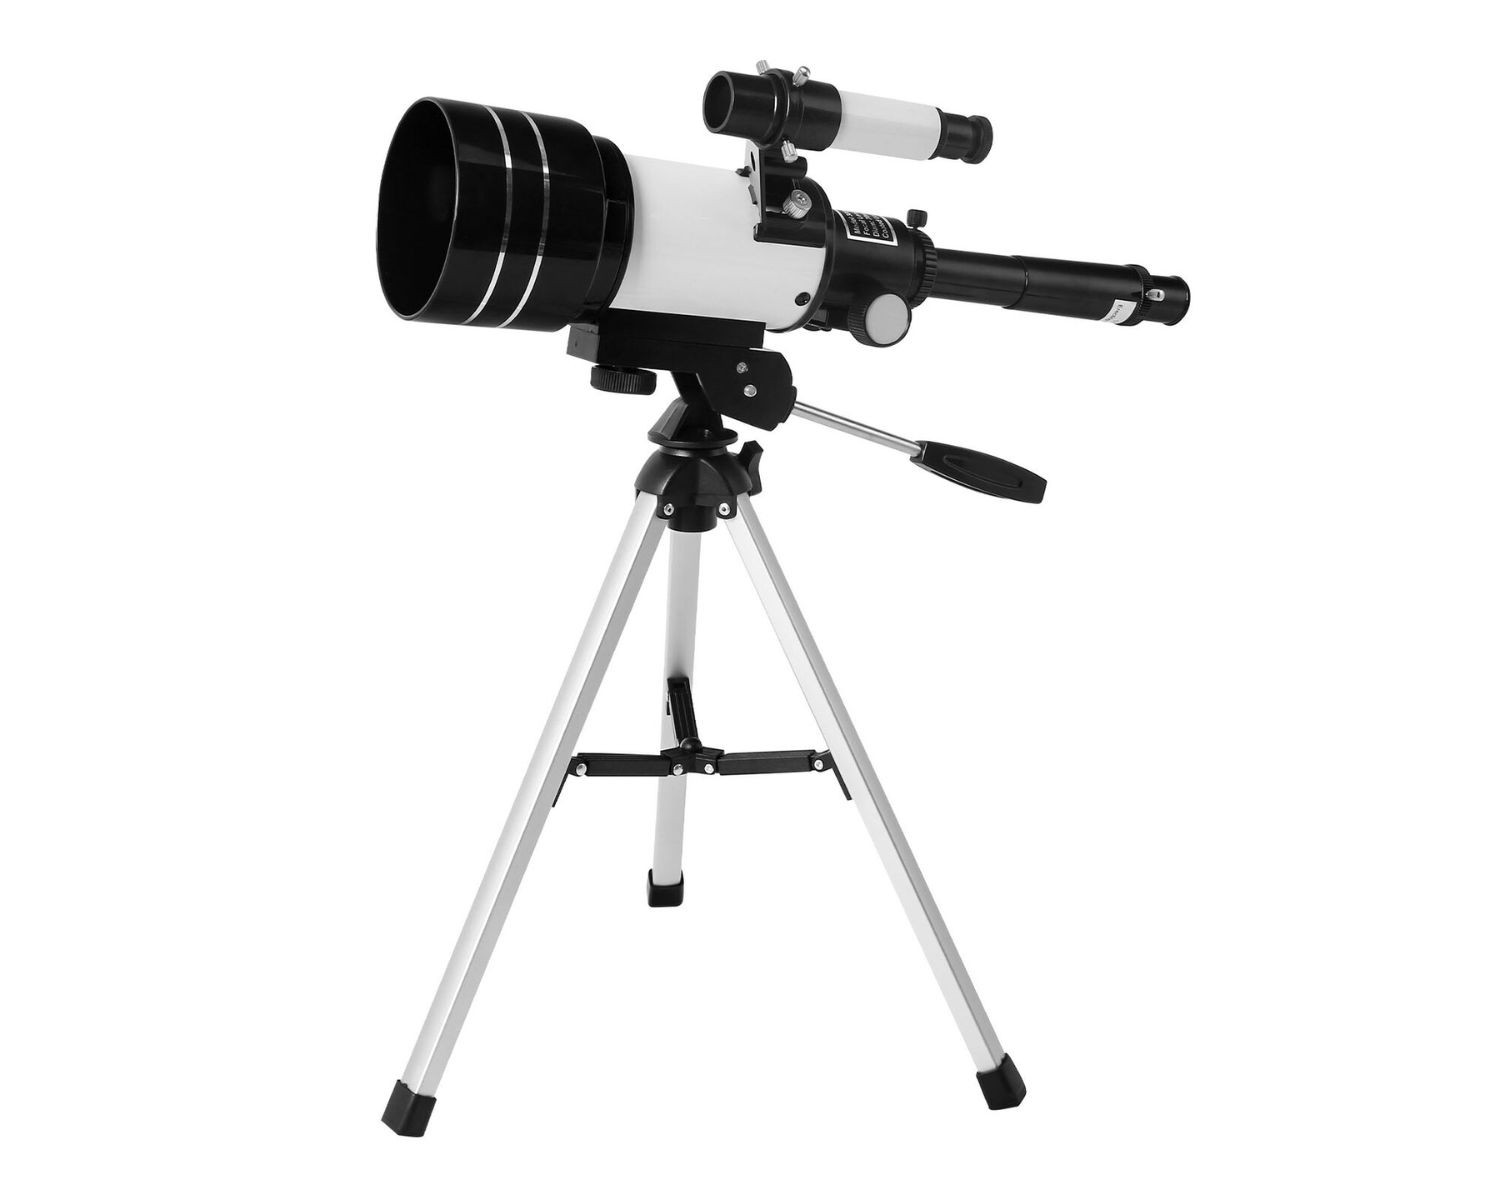 Telescope Review: Unbiased Analysis and Recommendations